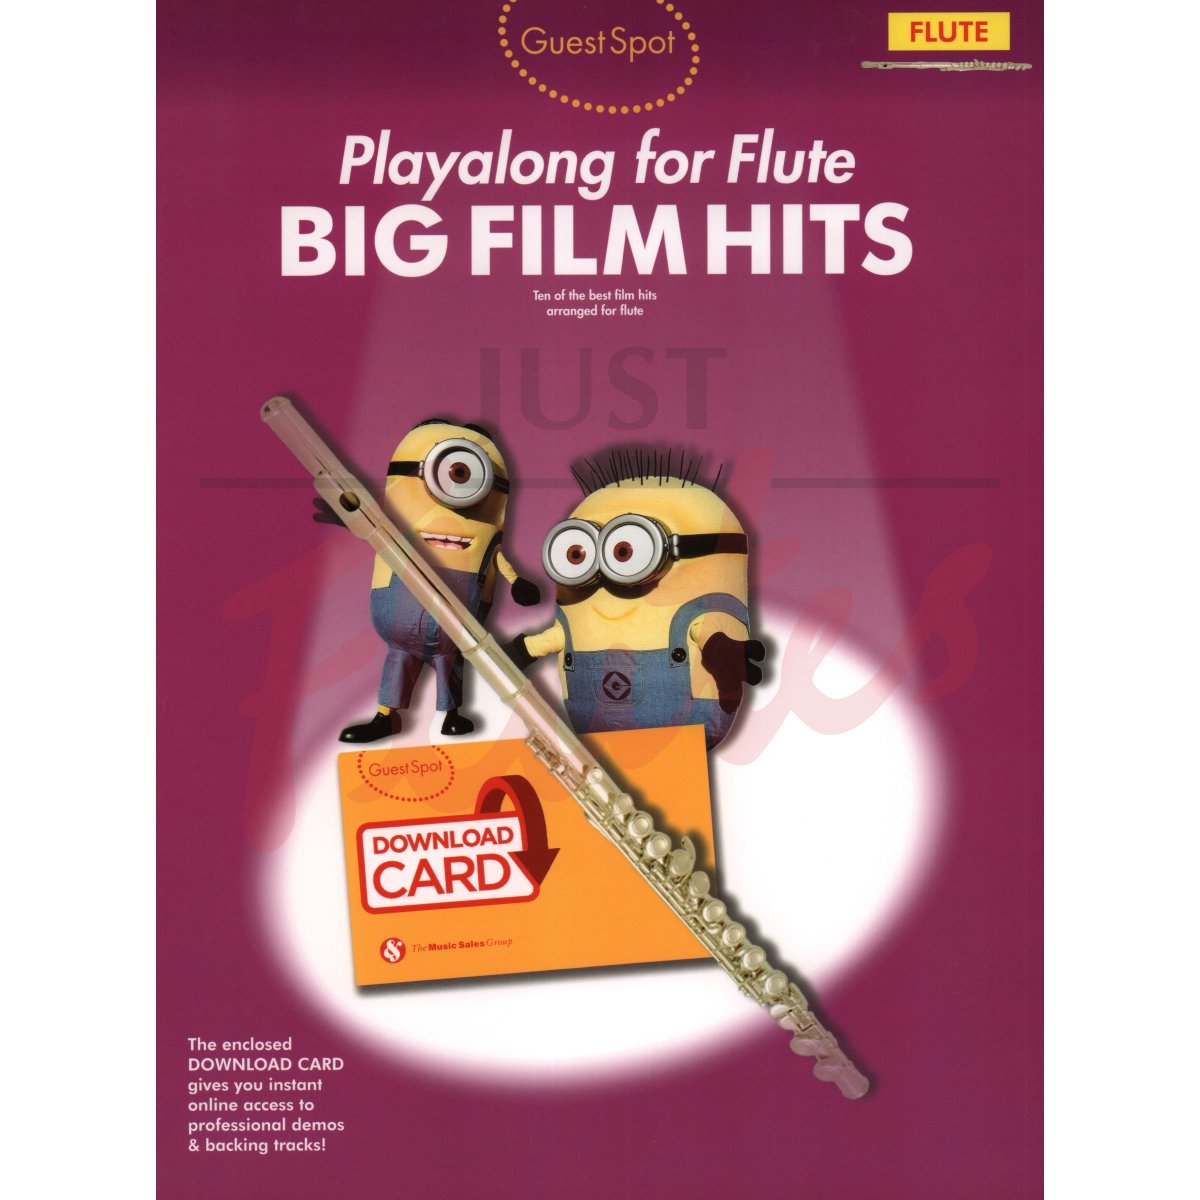 Guest Spot - Big Film Hits Playalong for Flute